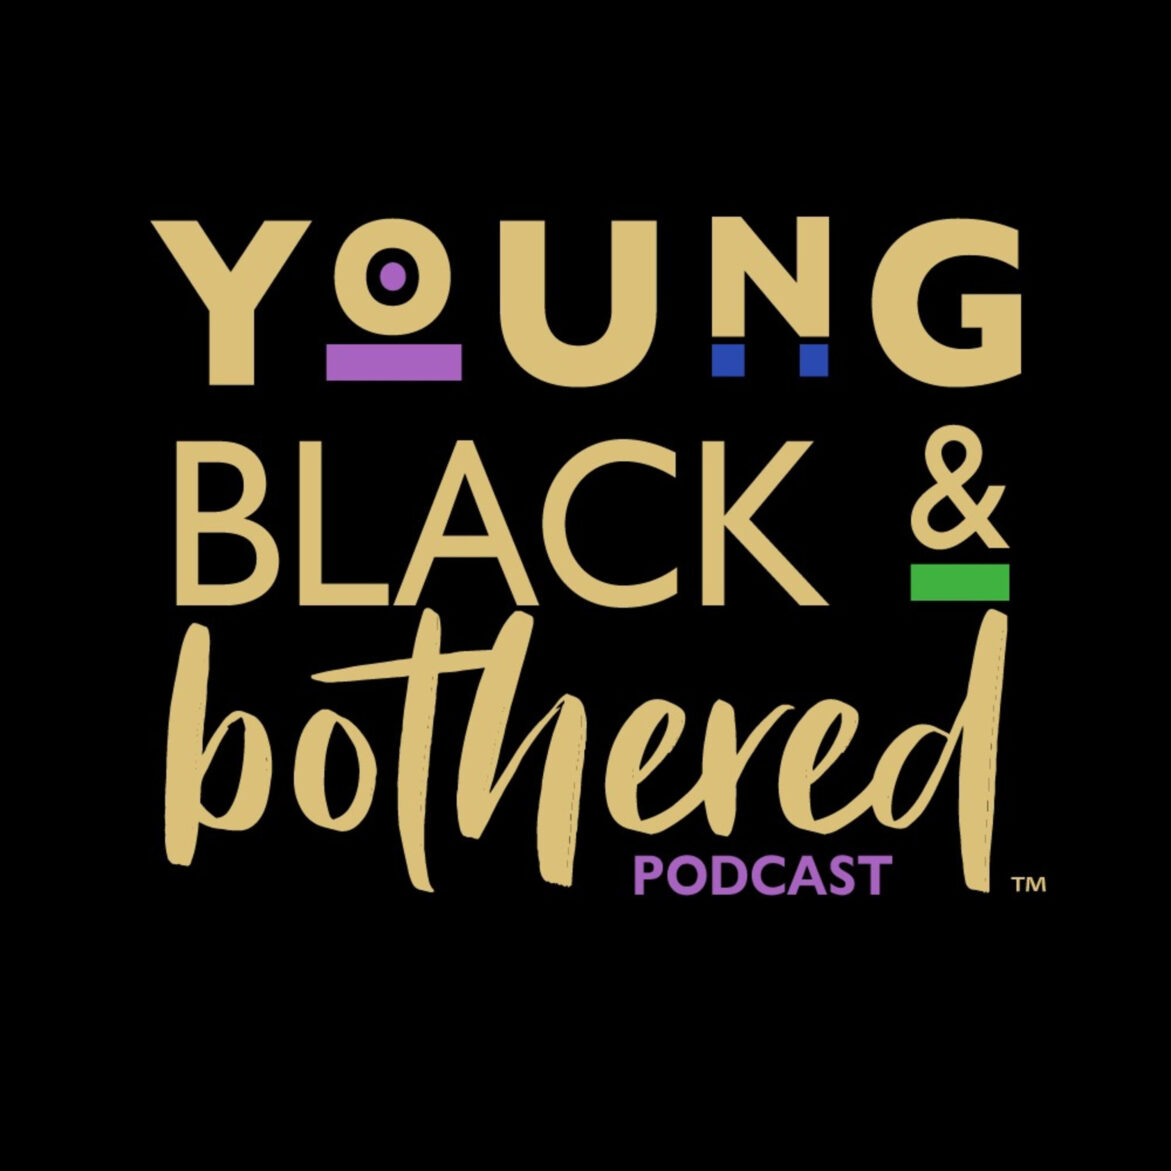 Black Podcasting - 205: Boats and Hoes